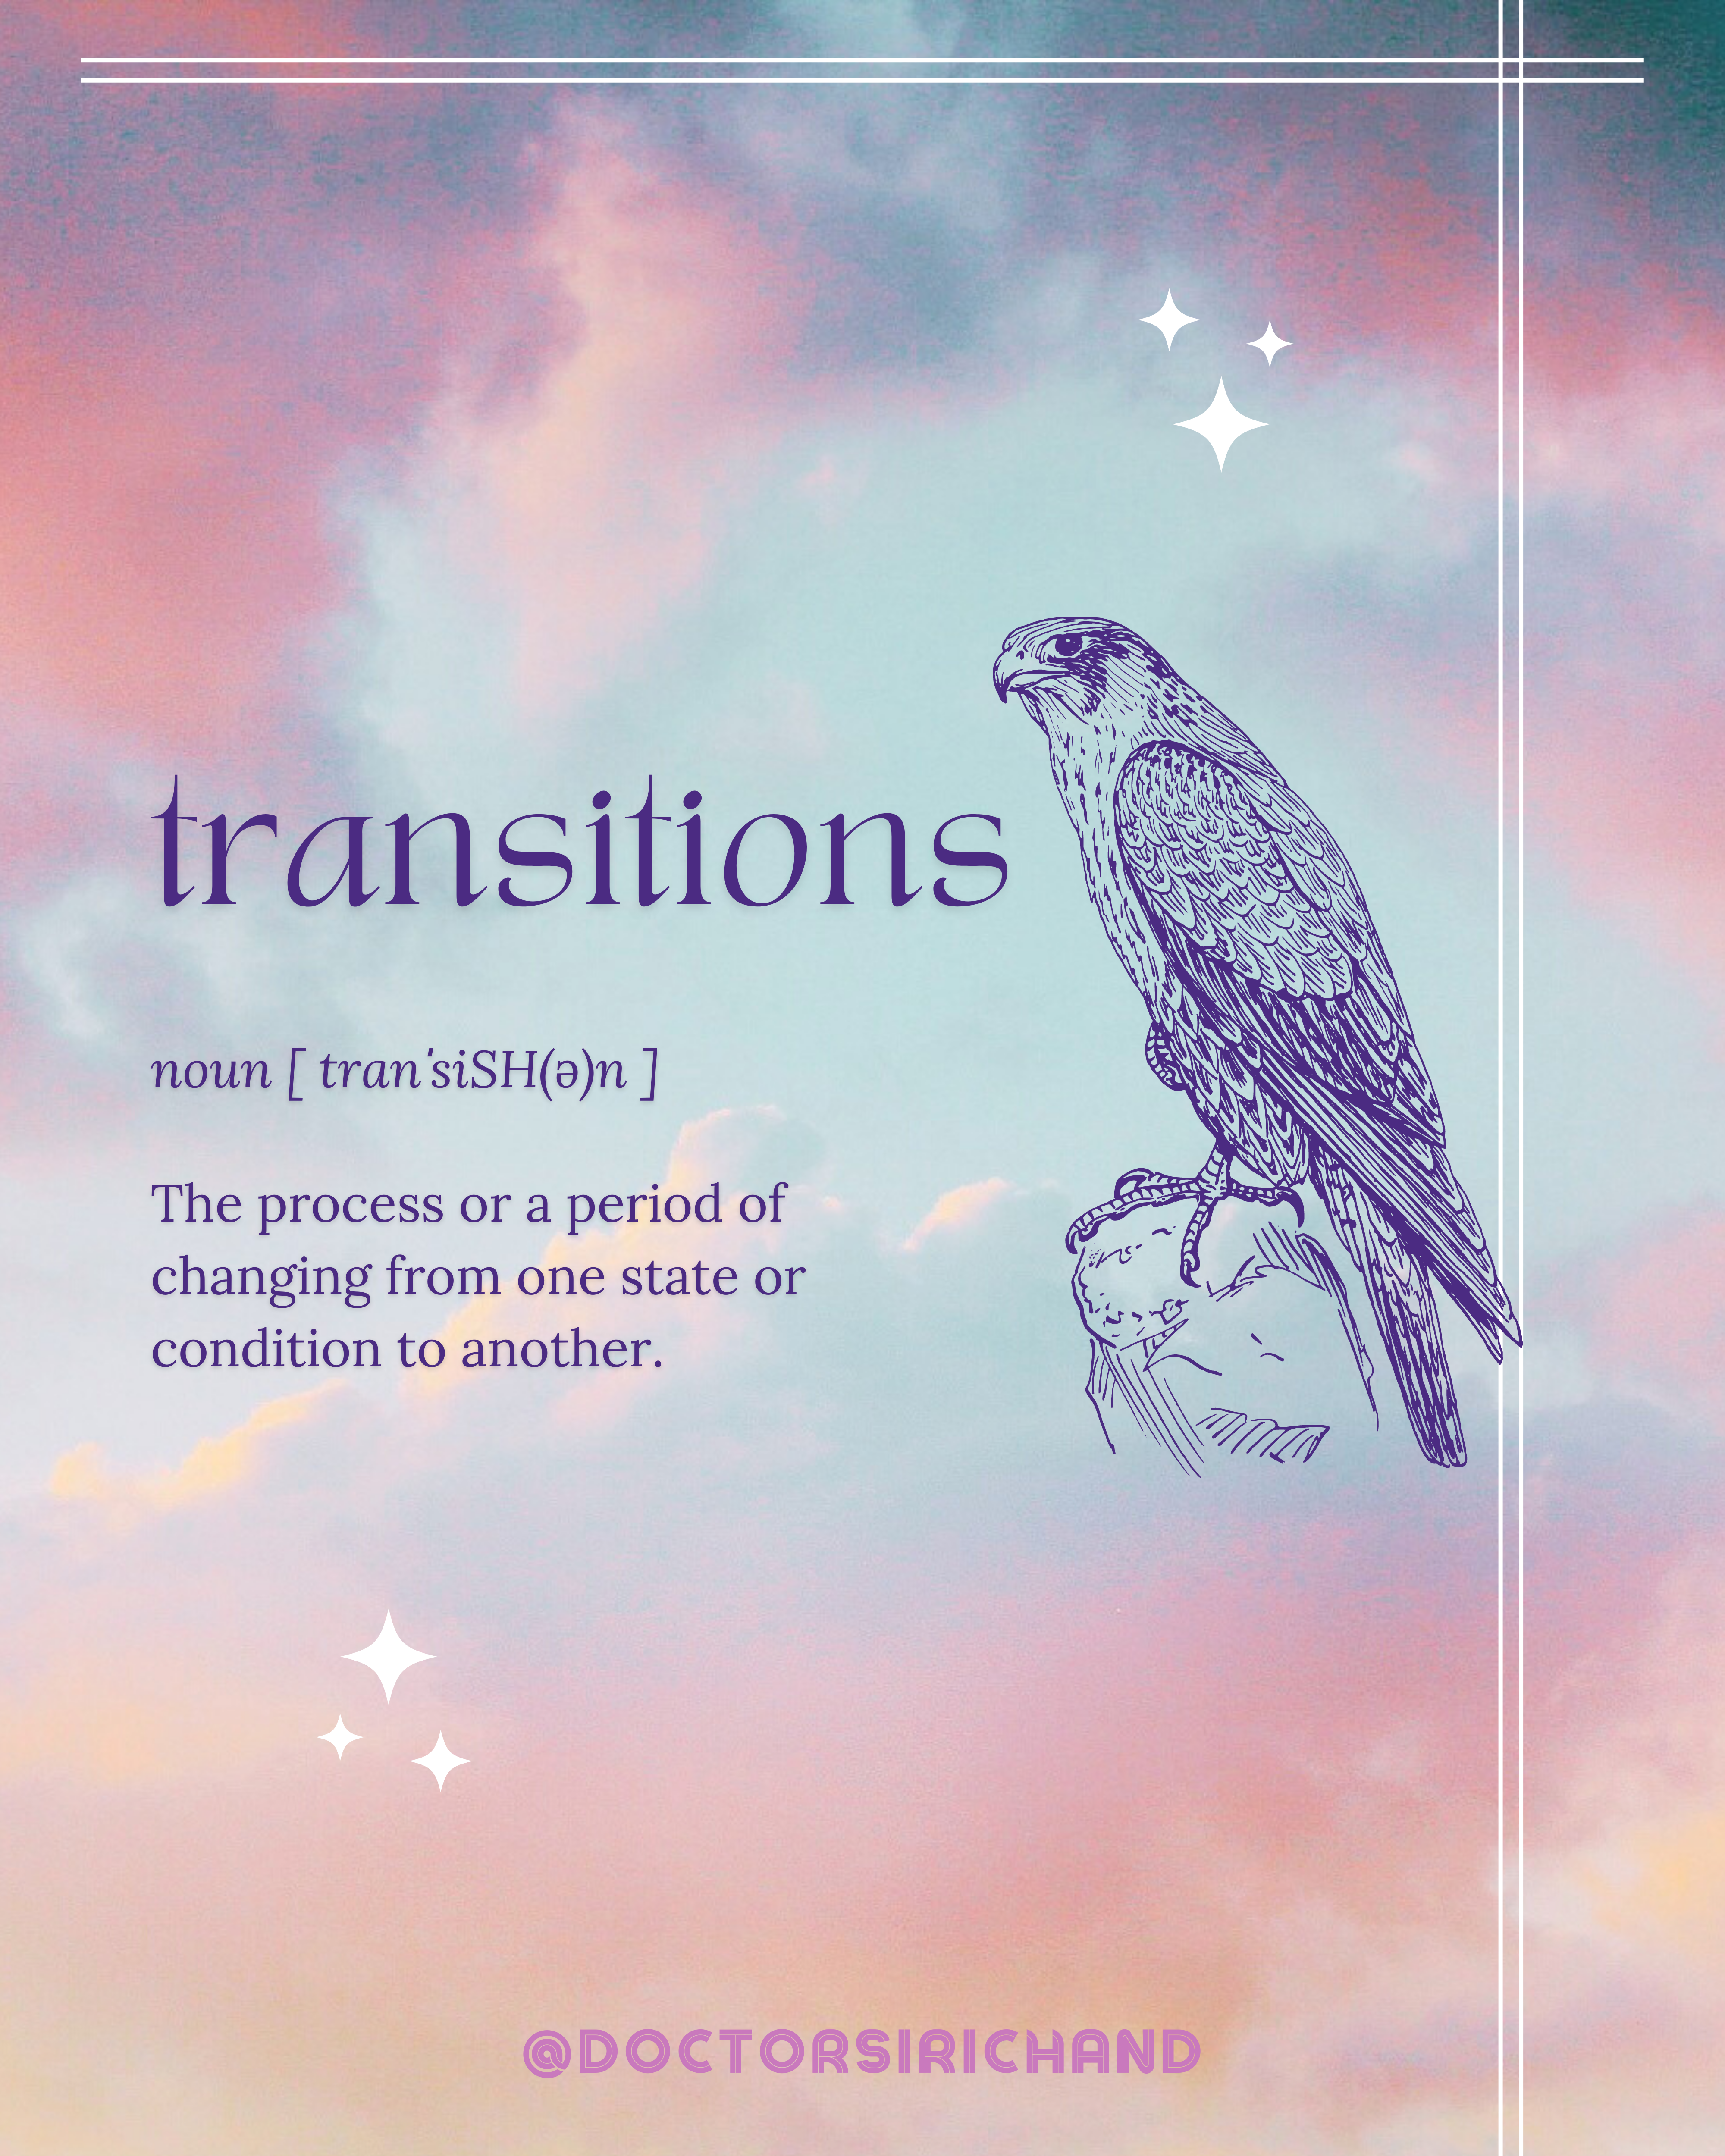 Transitions are the one constant